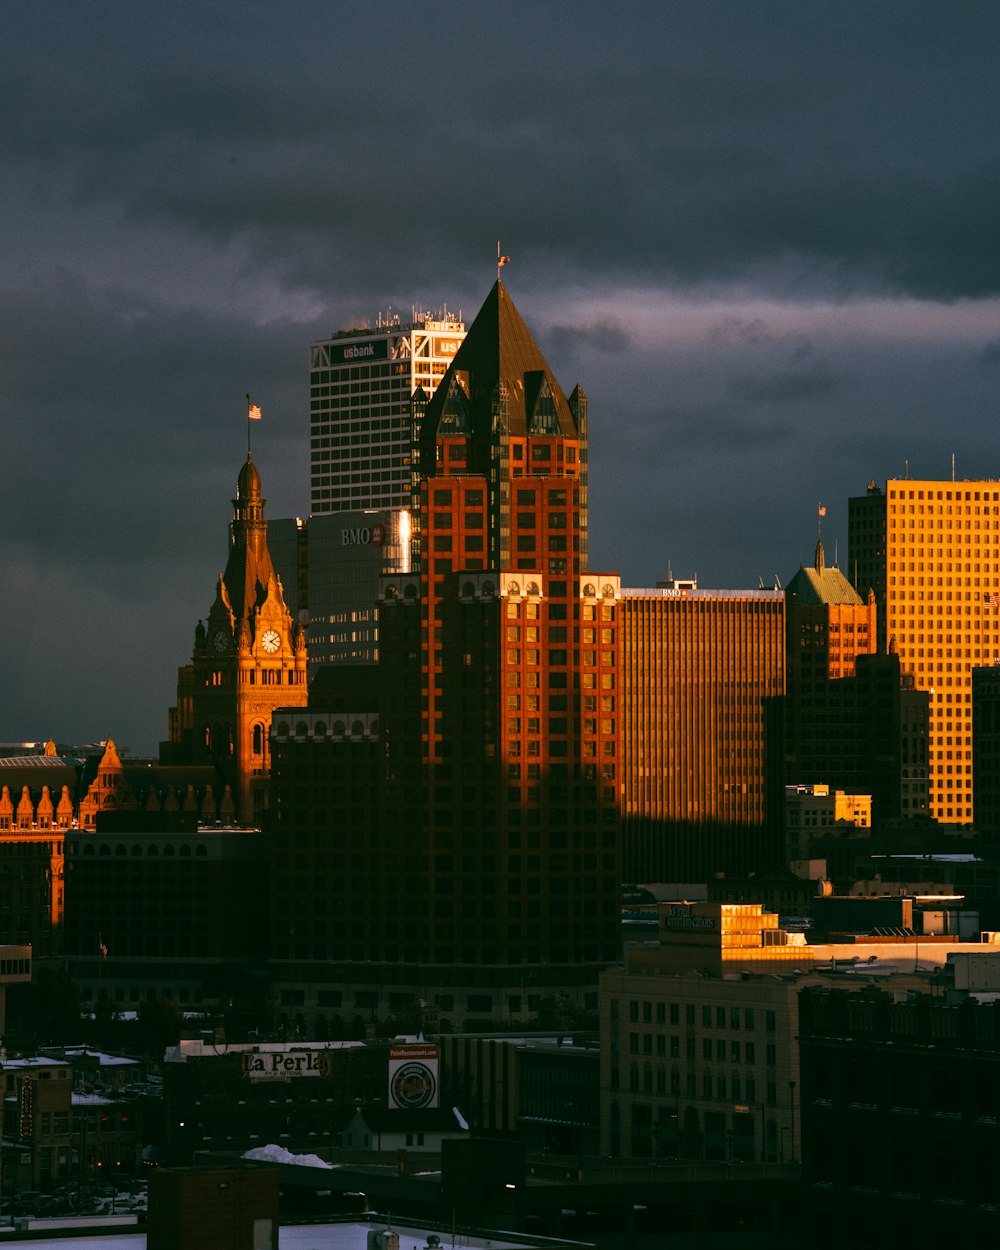 city skyline under gray cloudy sky during daytime